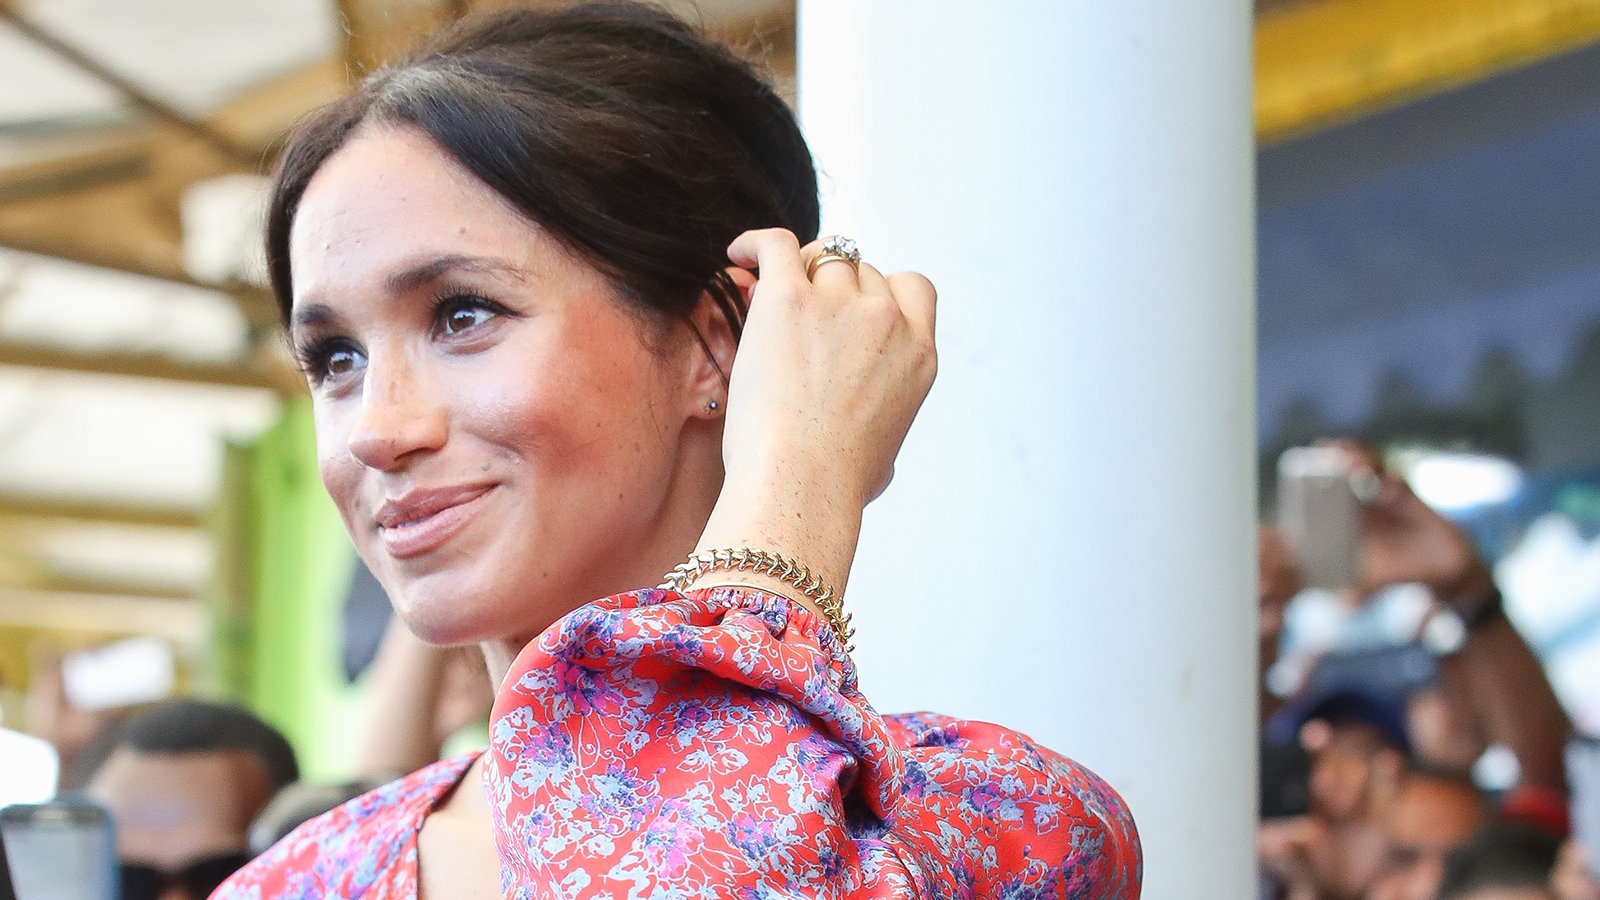 Twitter calls out Meghan Markle for ‘hypocrisy’ as old video of women curtseying goes viral

+2023